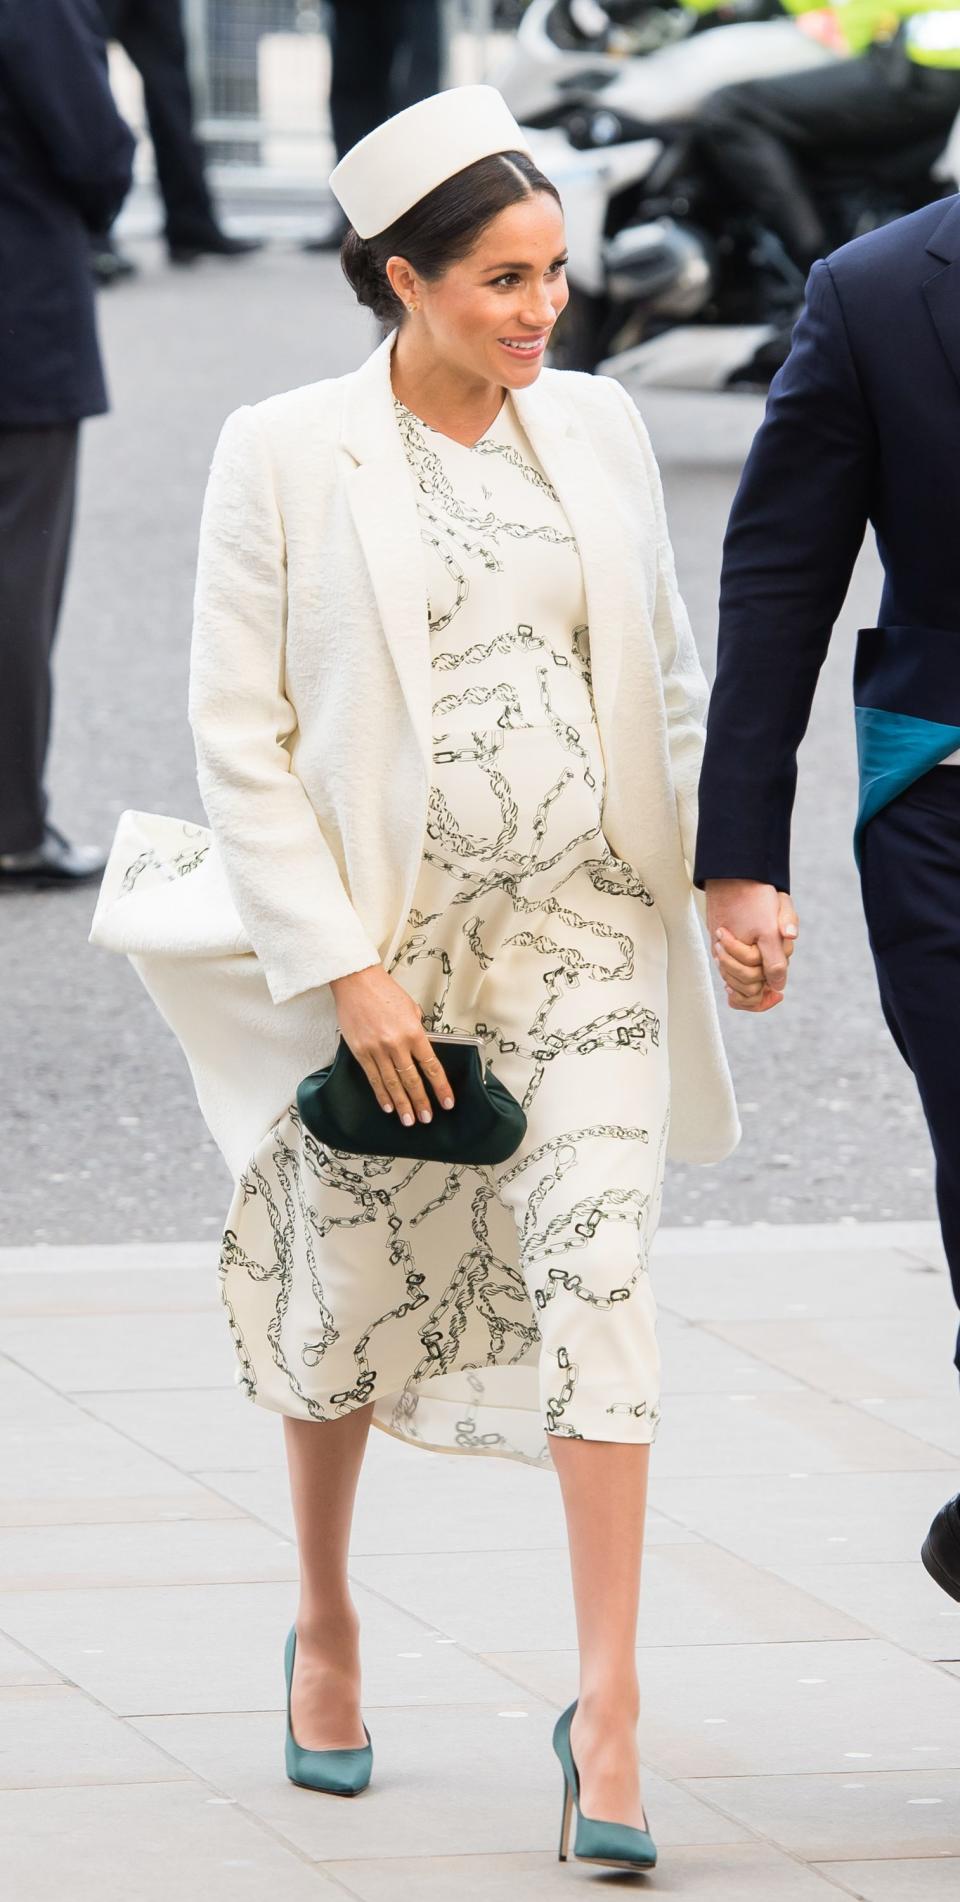 <p>Meghan Markle has quickly embraced the British royal family trademark: eccentric and stylish hats. From structured fascinators to wide brimmed saucers, take a peek at the Duchess of Sussex's best millinery fashion moments. </p>